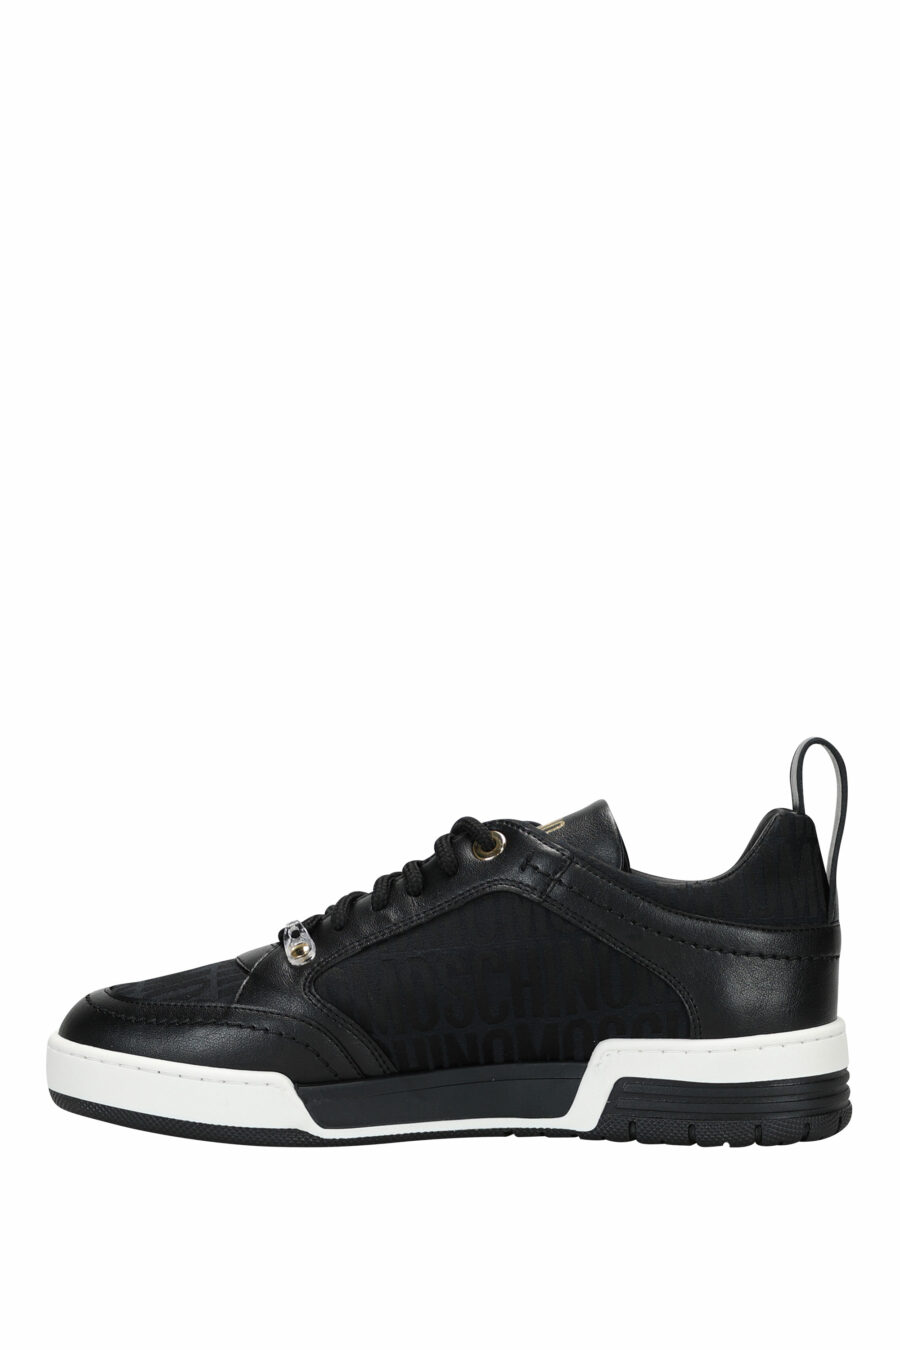 Black leather trainers with "all over logo" and white sole - 8054653835405 2